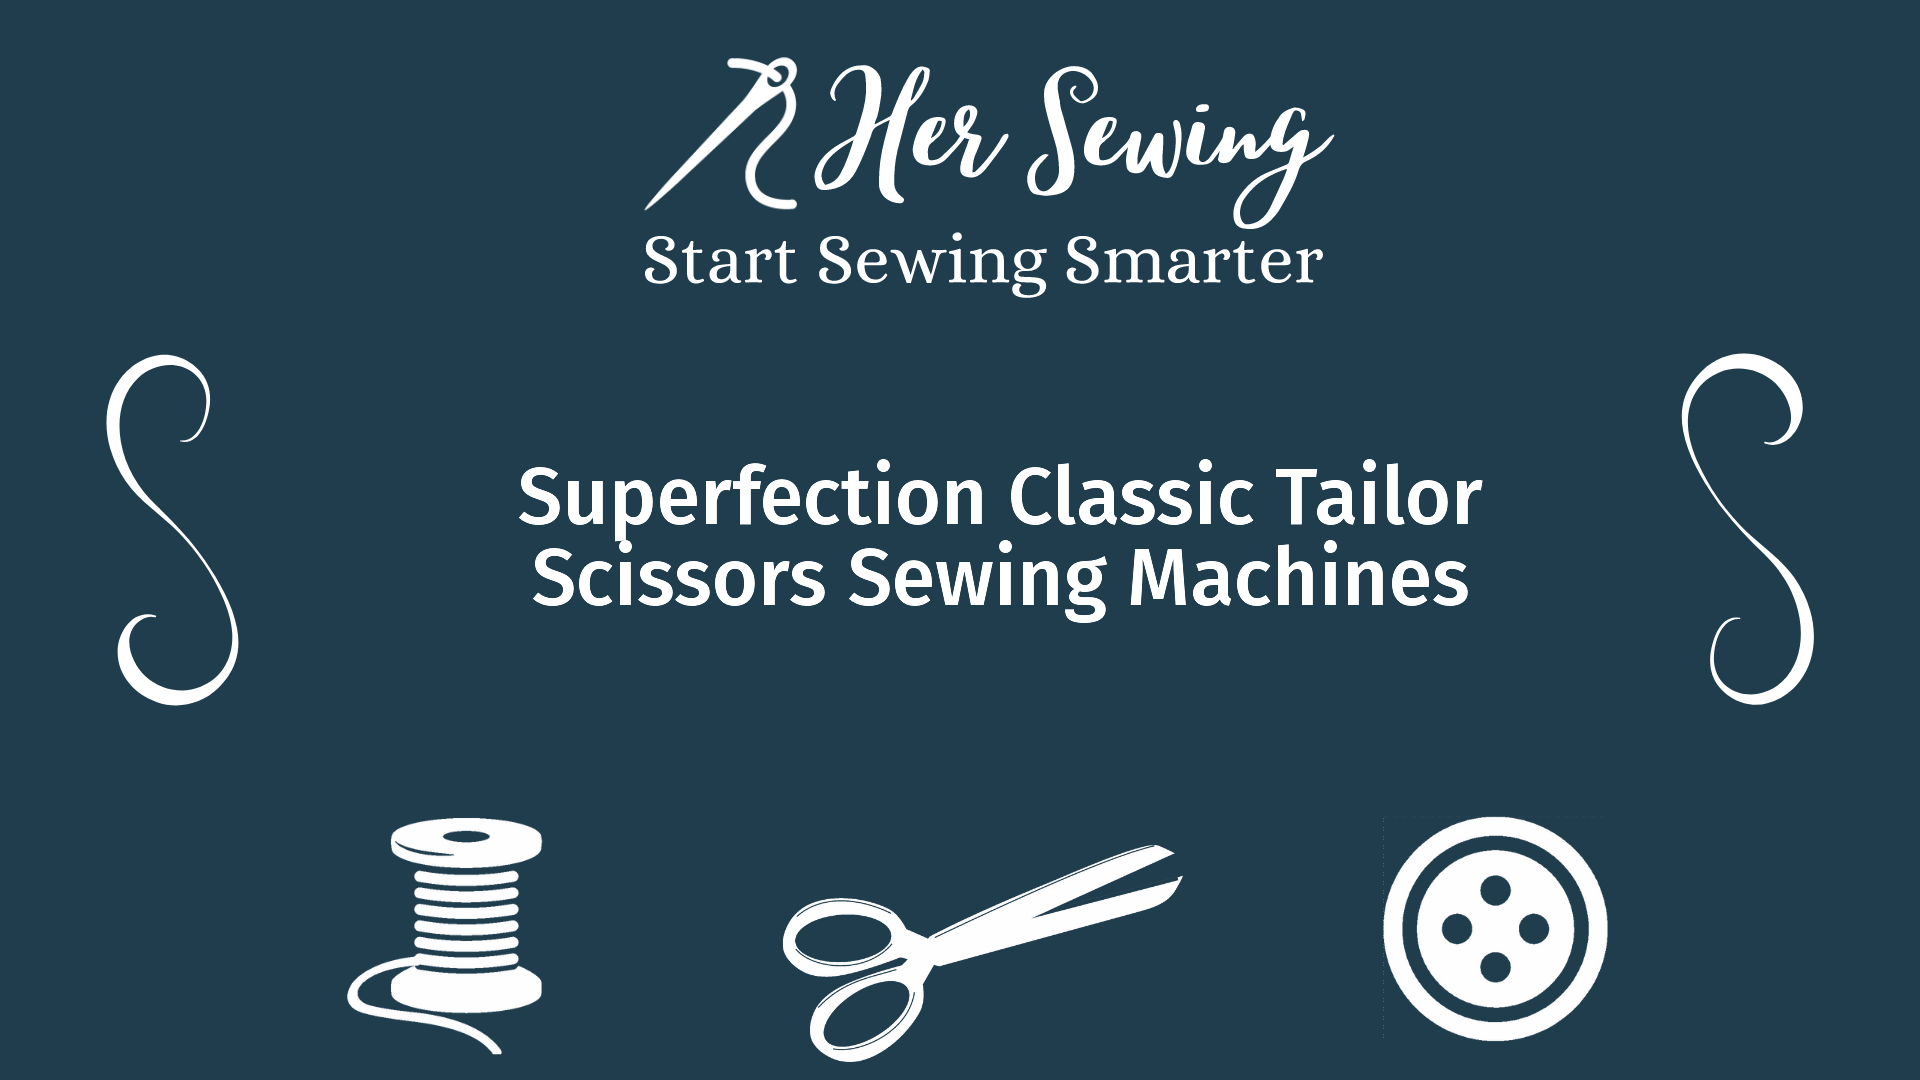 Superfection Classic Tailor Scissors Sewing Machines